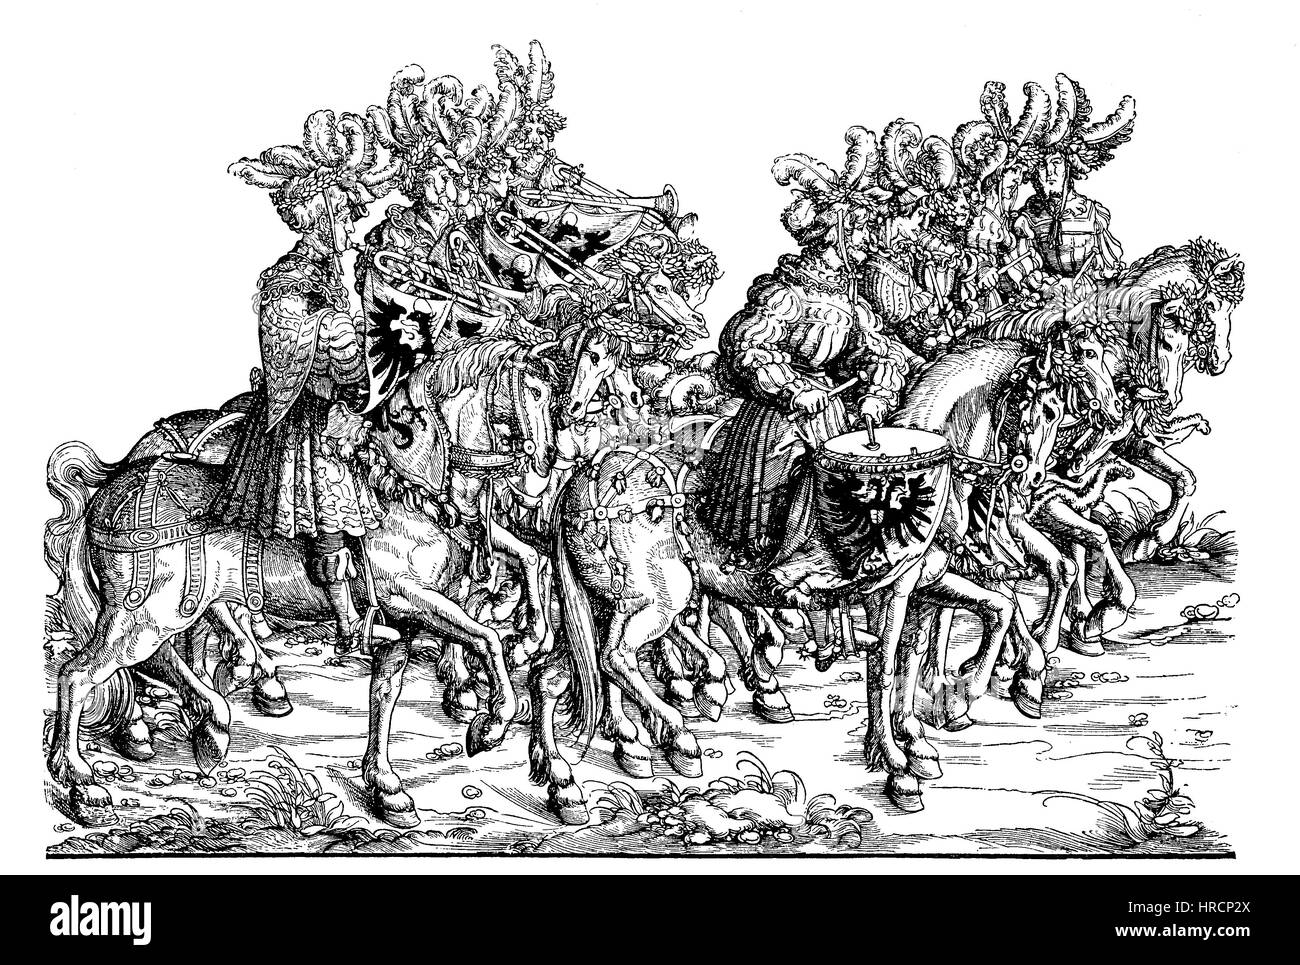 Trumpeter, Group of Maximilians I. triumphal procession, facsimile from Hans Burgkmair Woodcut: The Triumphal Procession, Triumphzug, or Triumphs of Maximilian is a monumental 16th-century , reproduction of an woodcut from the 19th century, 1885 Stock Photo